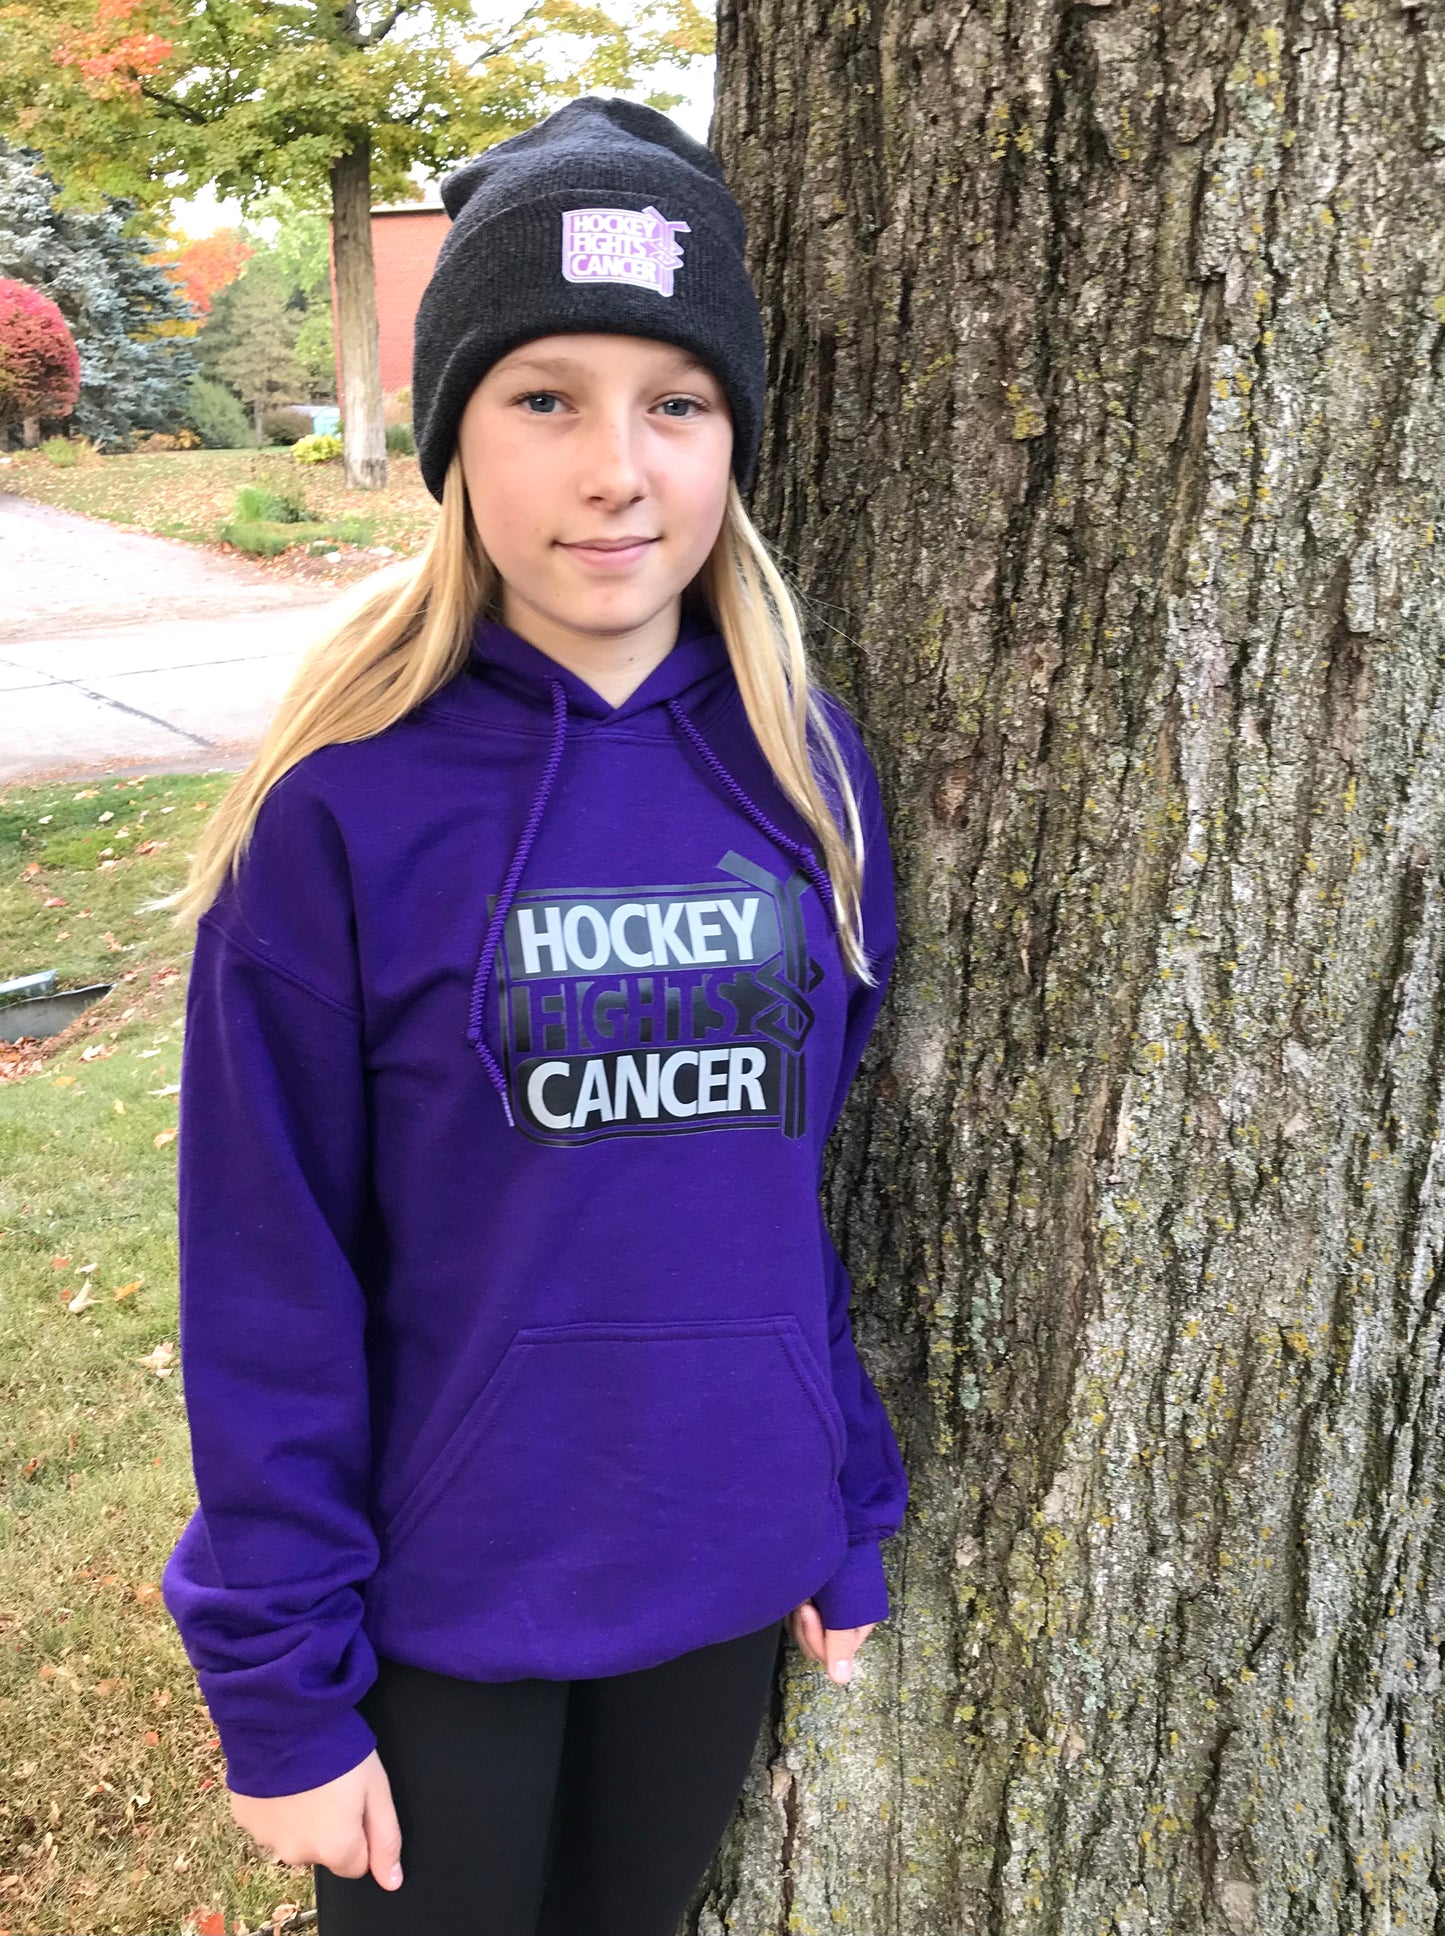 All sizes Hoodies - Regular quality - Hockey fights Cancer